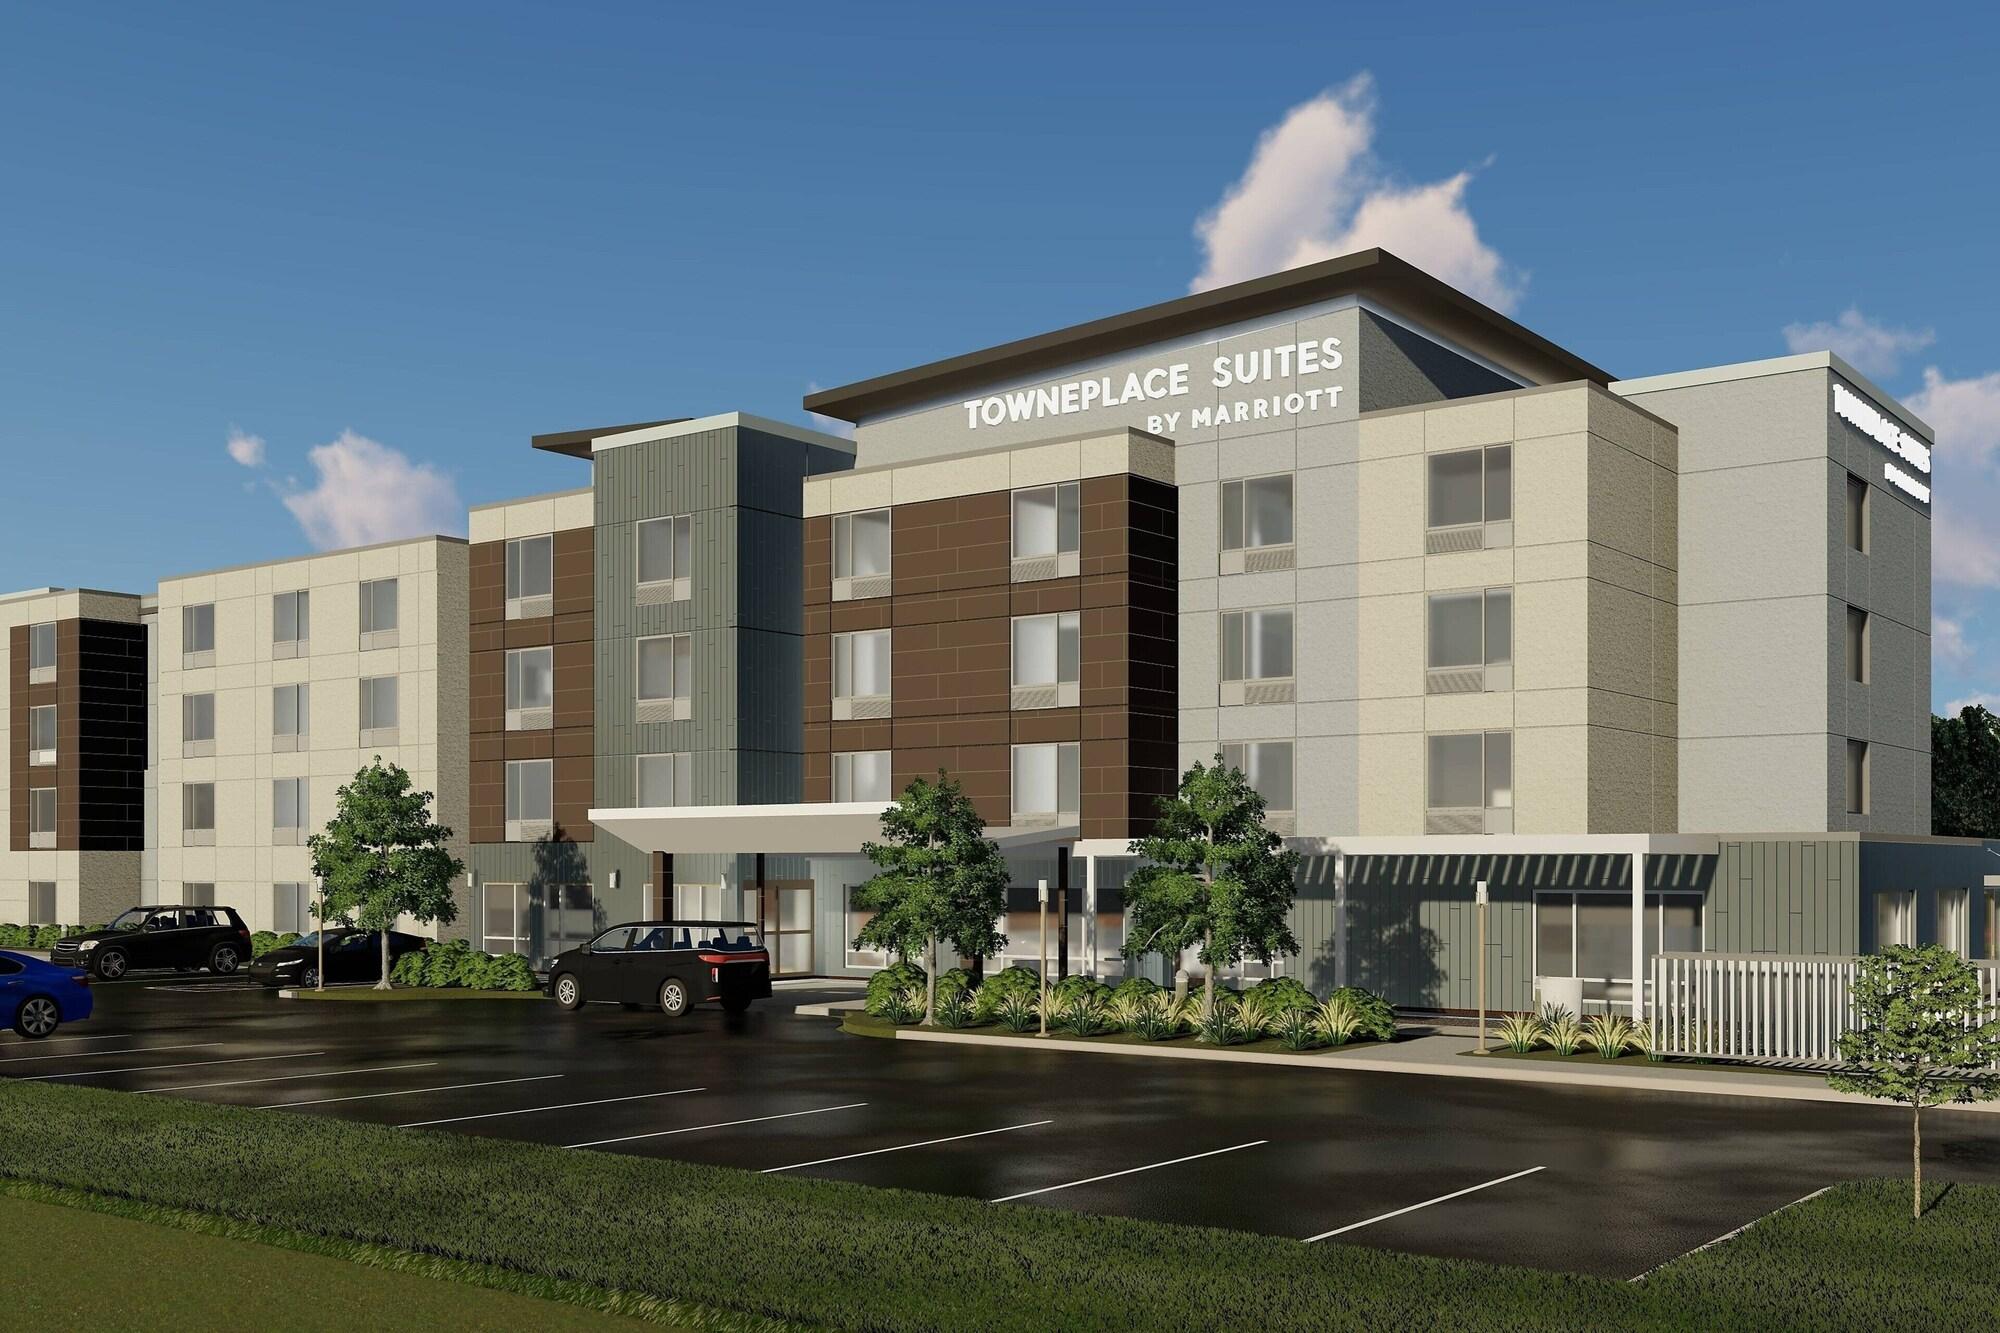 TownePlace Suites by Marriott Hamilton image